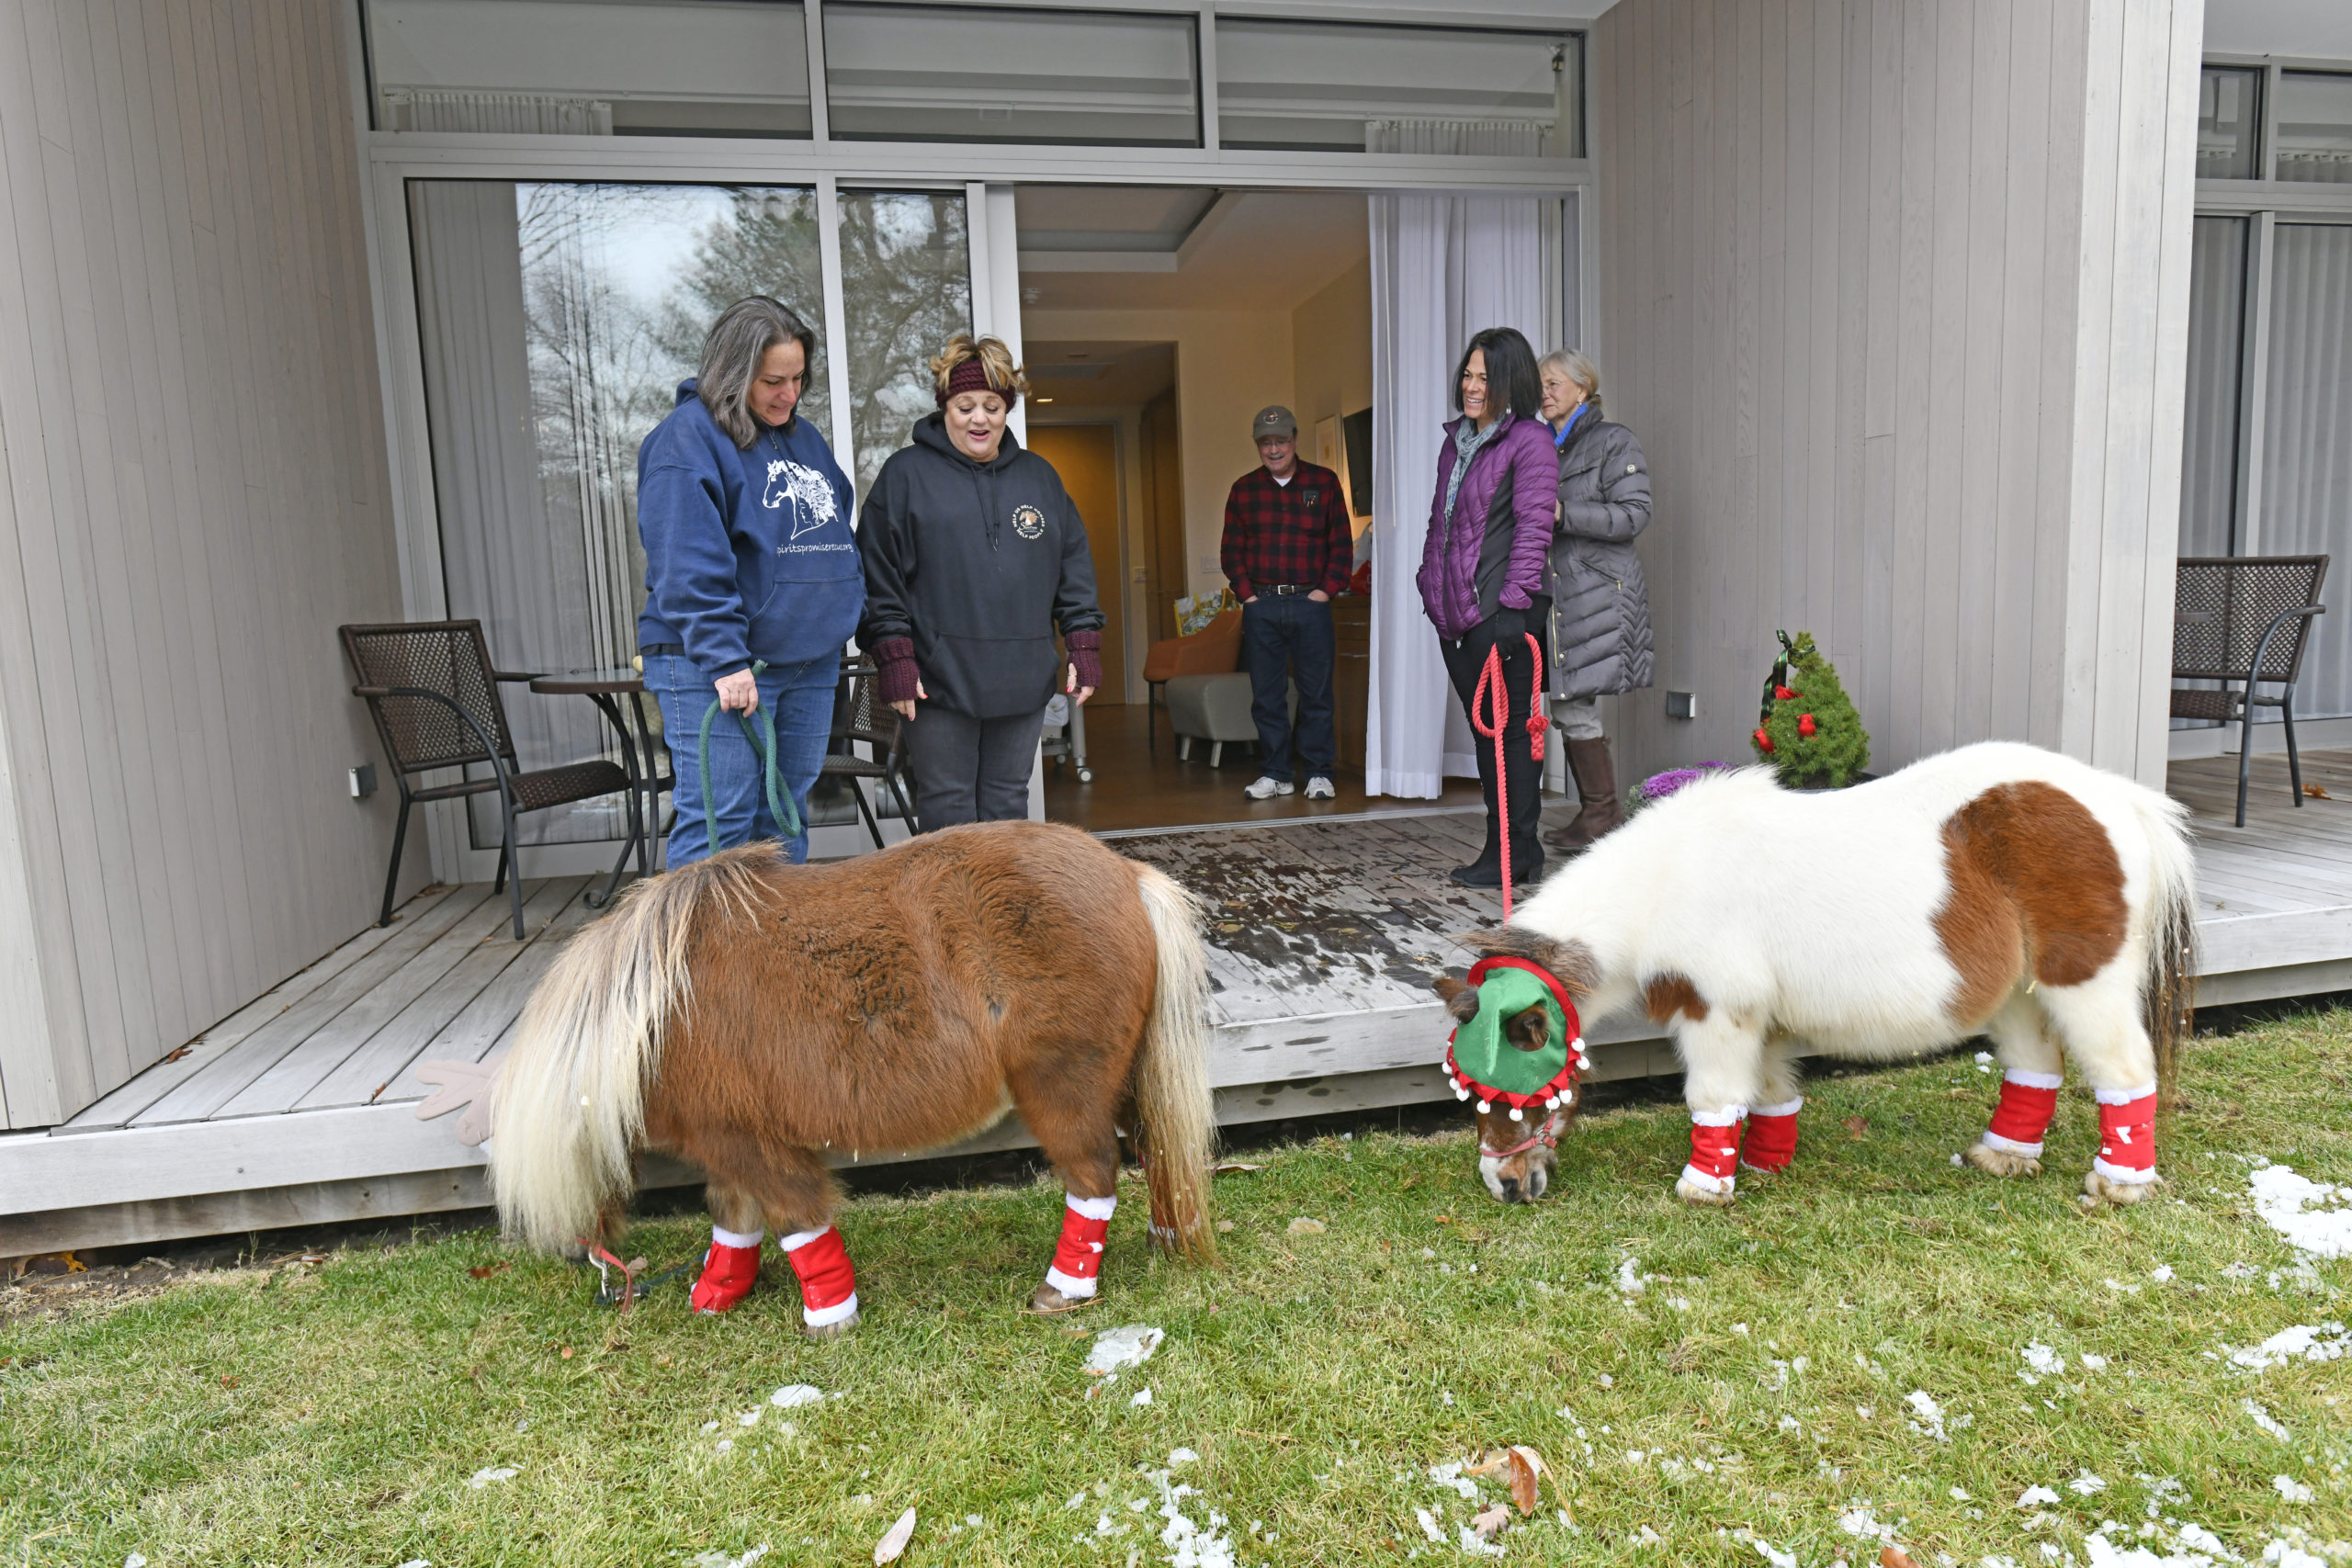 Mini horses Sweetie and Christmas from Spirit’s Promise Equine Rescue and Rehabilitation Program in Riverhead paid a visit to Daniel Byrne at the East End Hospice Kanas Center for Hospice Care in Westhampton Beach last week.     DANA SHAW